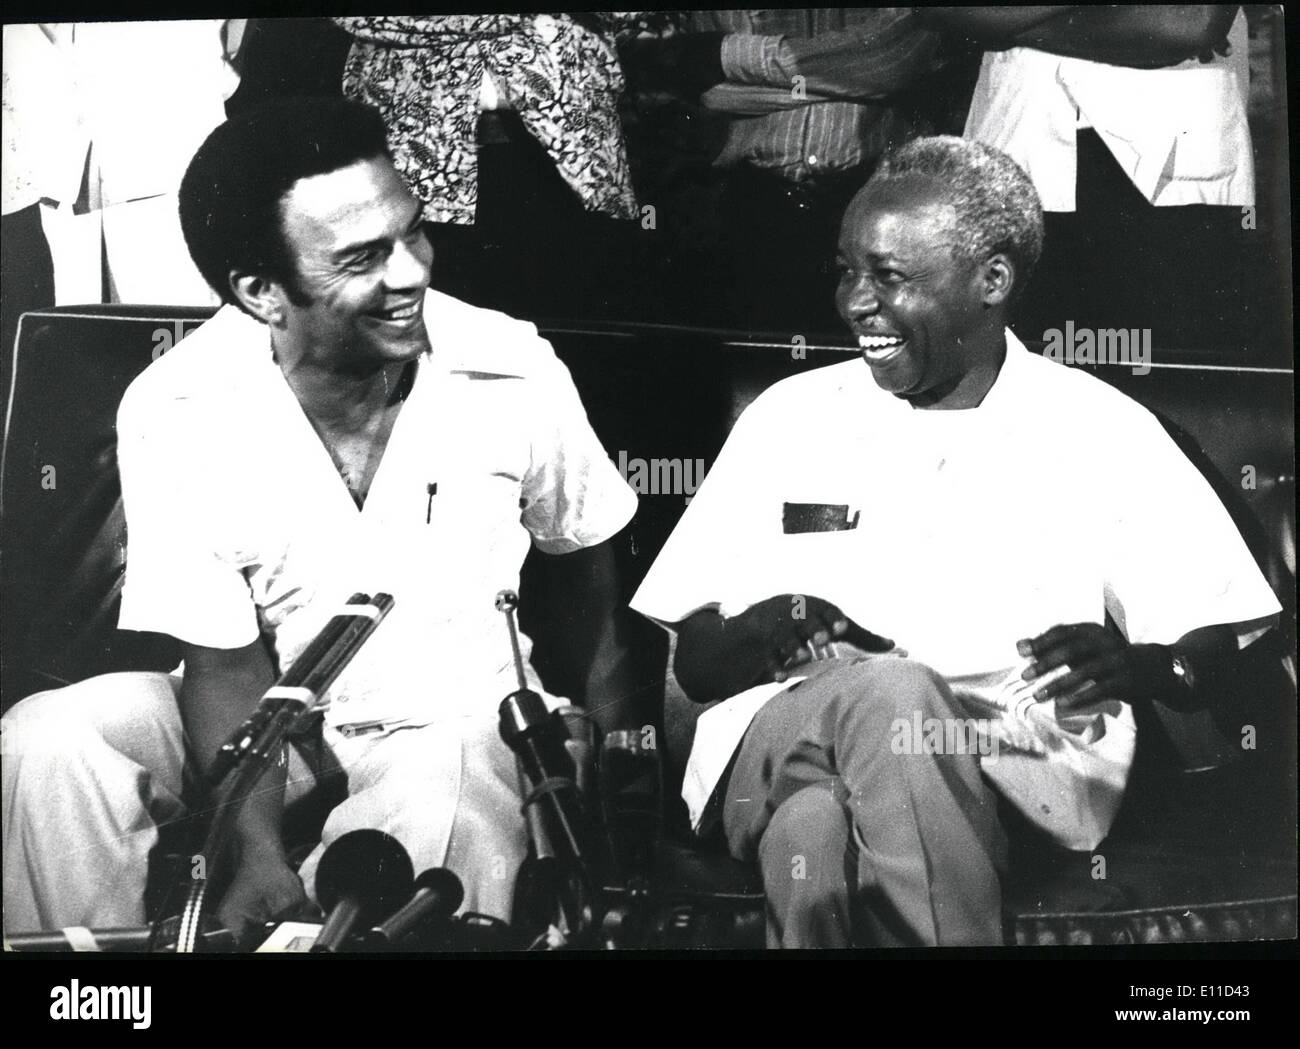 Feb. 02, 1977 - Daressalaam Tanzania: President Julius Nyerere of Tanzania shares a joke with Andrew Young, the UN Ambassador to the United Nations. Credits: Camerapix Stock Photo